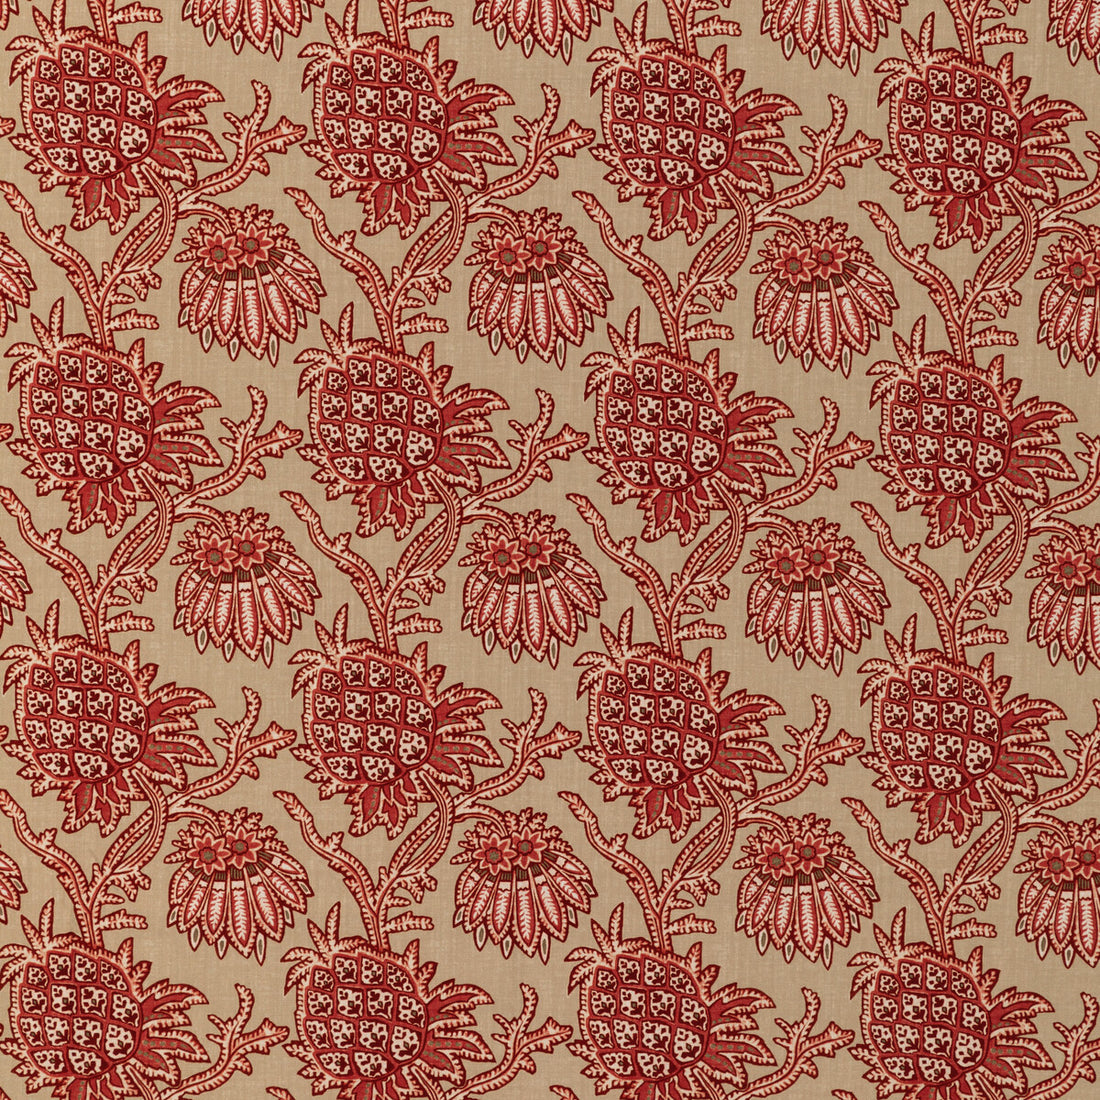 Brassac Print fabric in red color - pattern 8020129.19.0 - by Brunschwig &amp; Fils in the En Vacances II collection